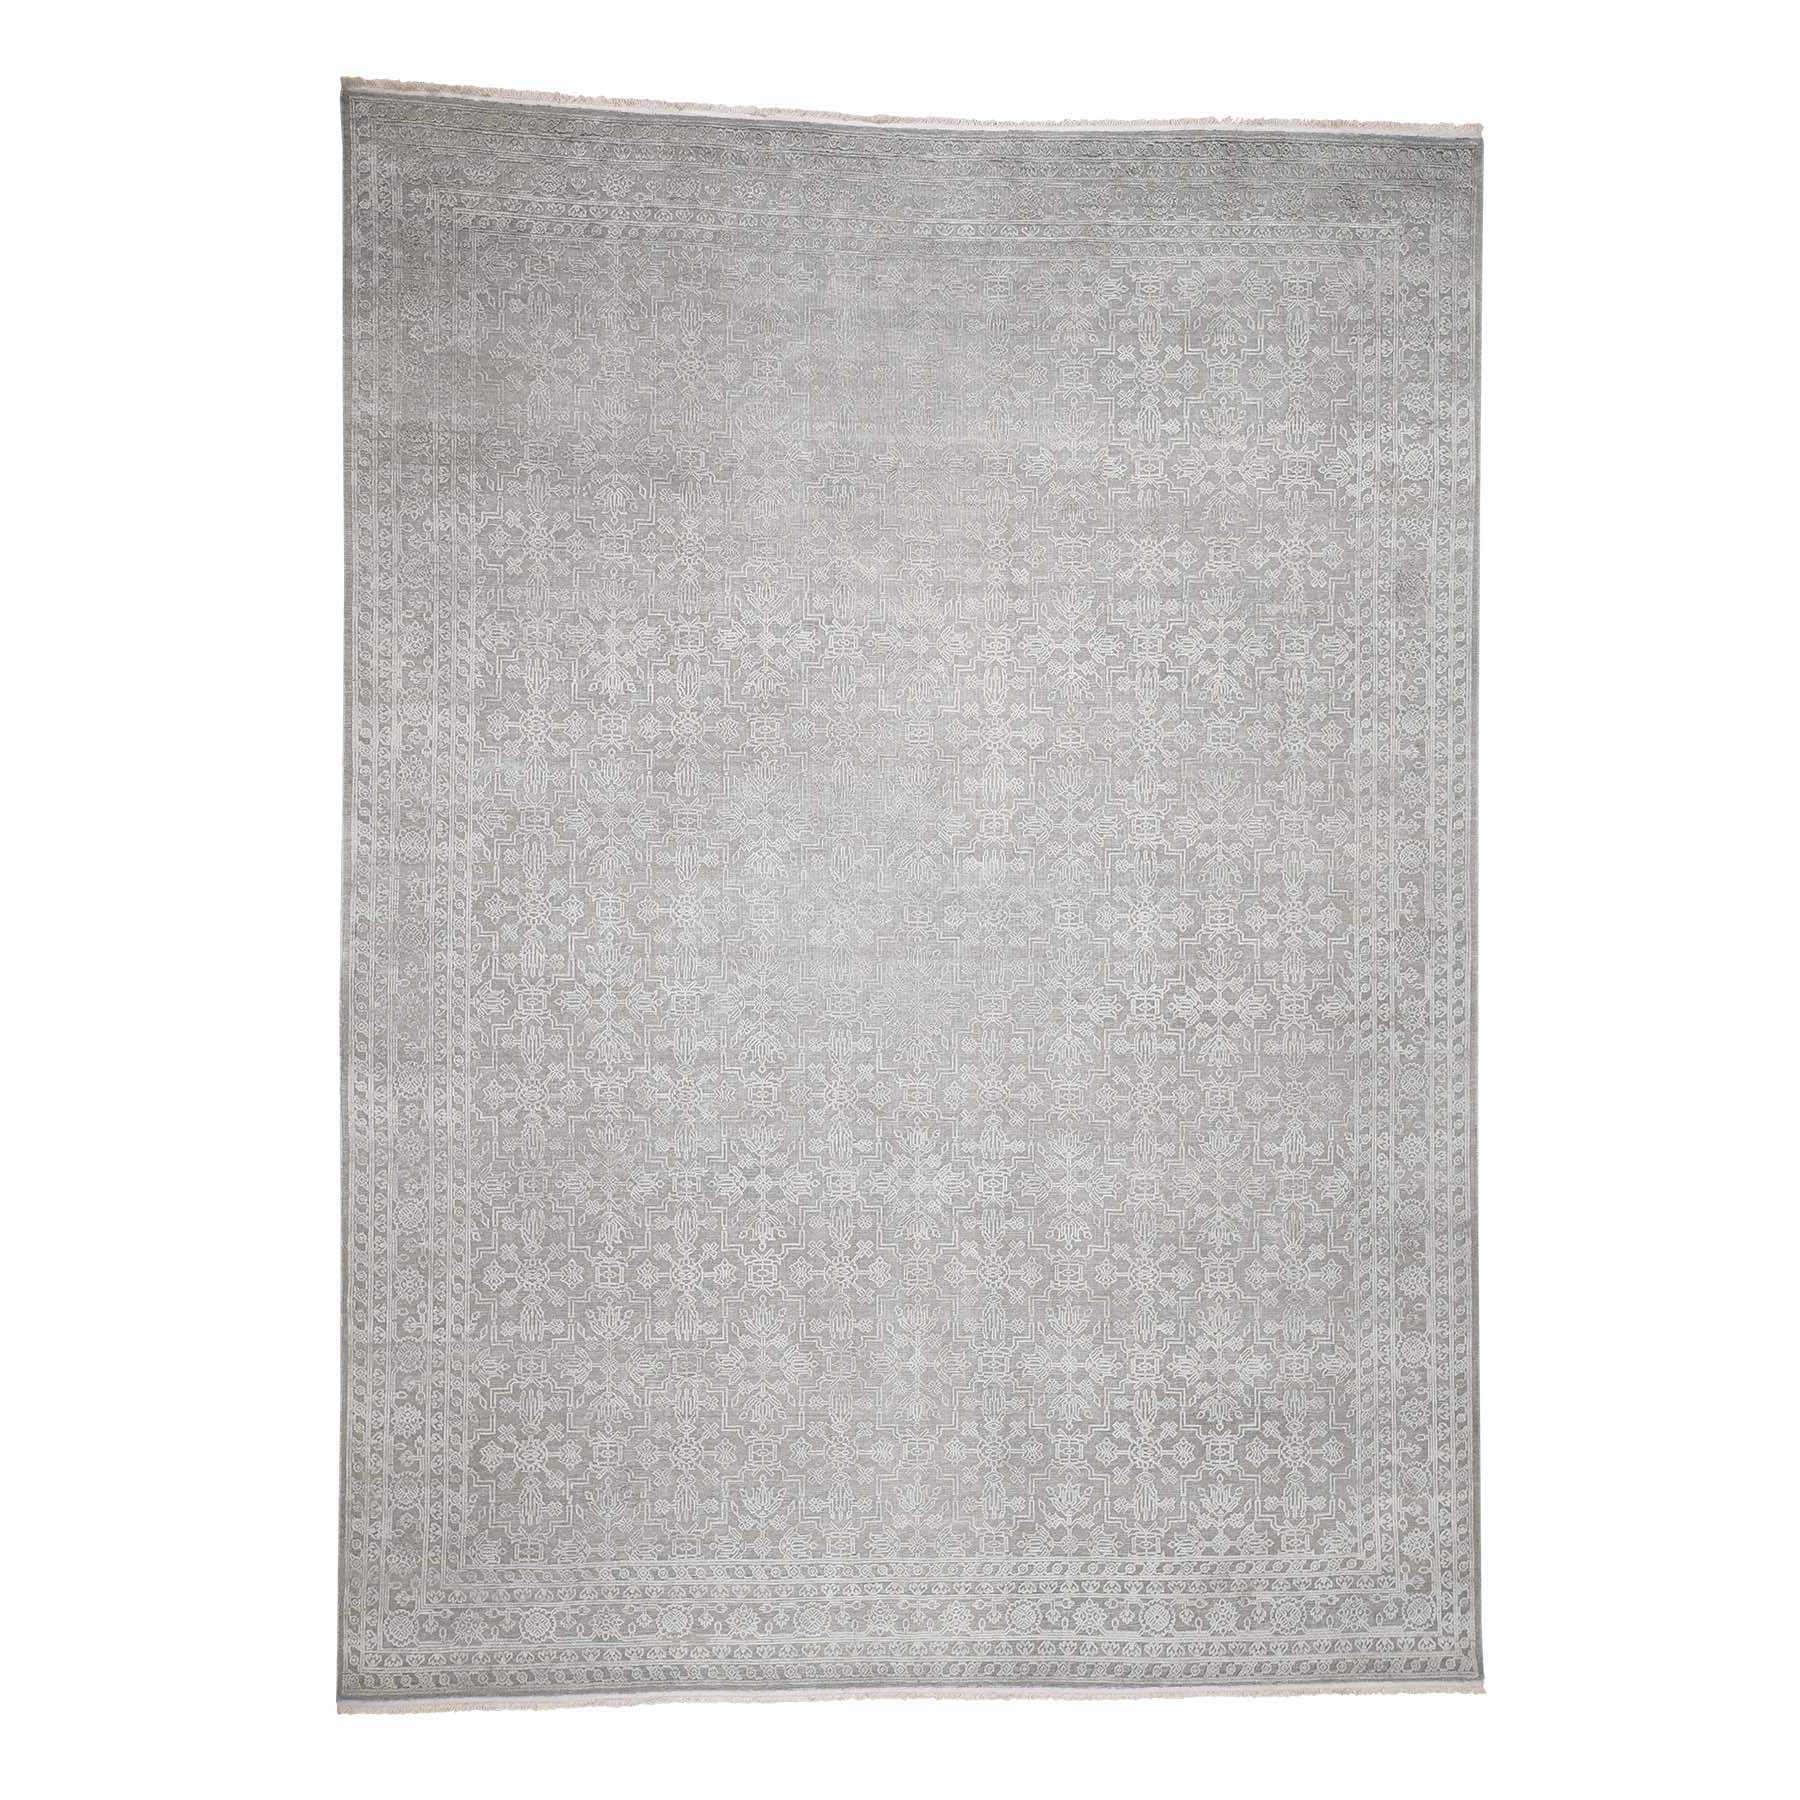 8'10"x12' Tone on Tone Silk with Textured Wool Hand Woven Oriental Rug 